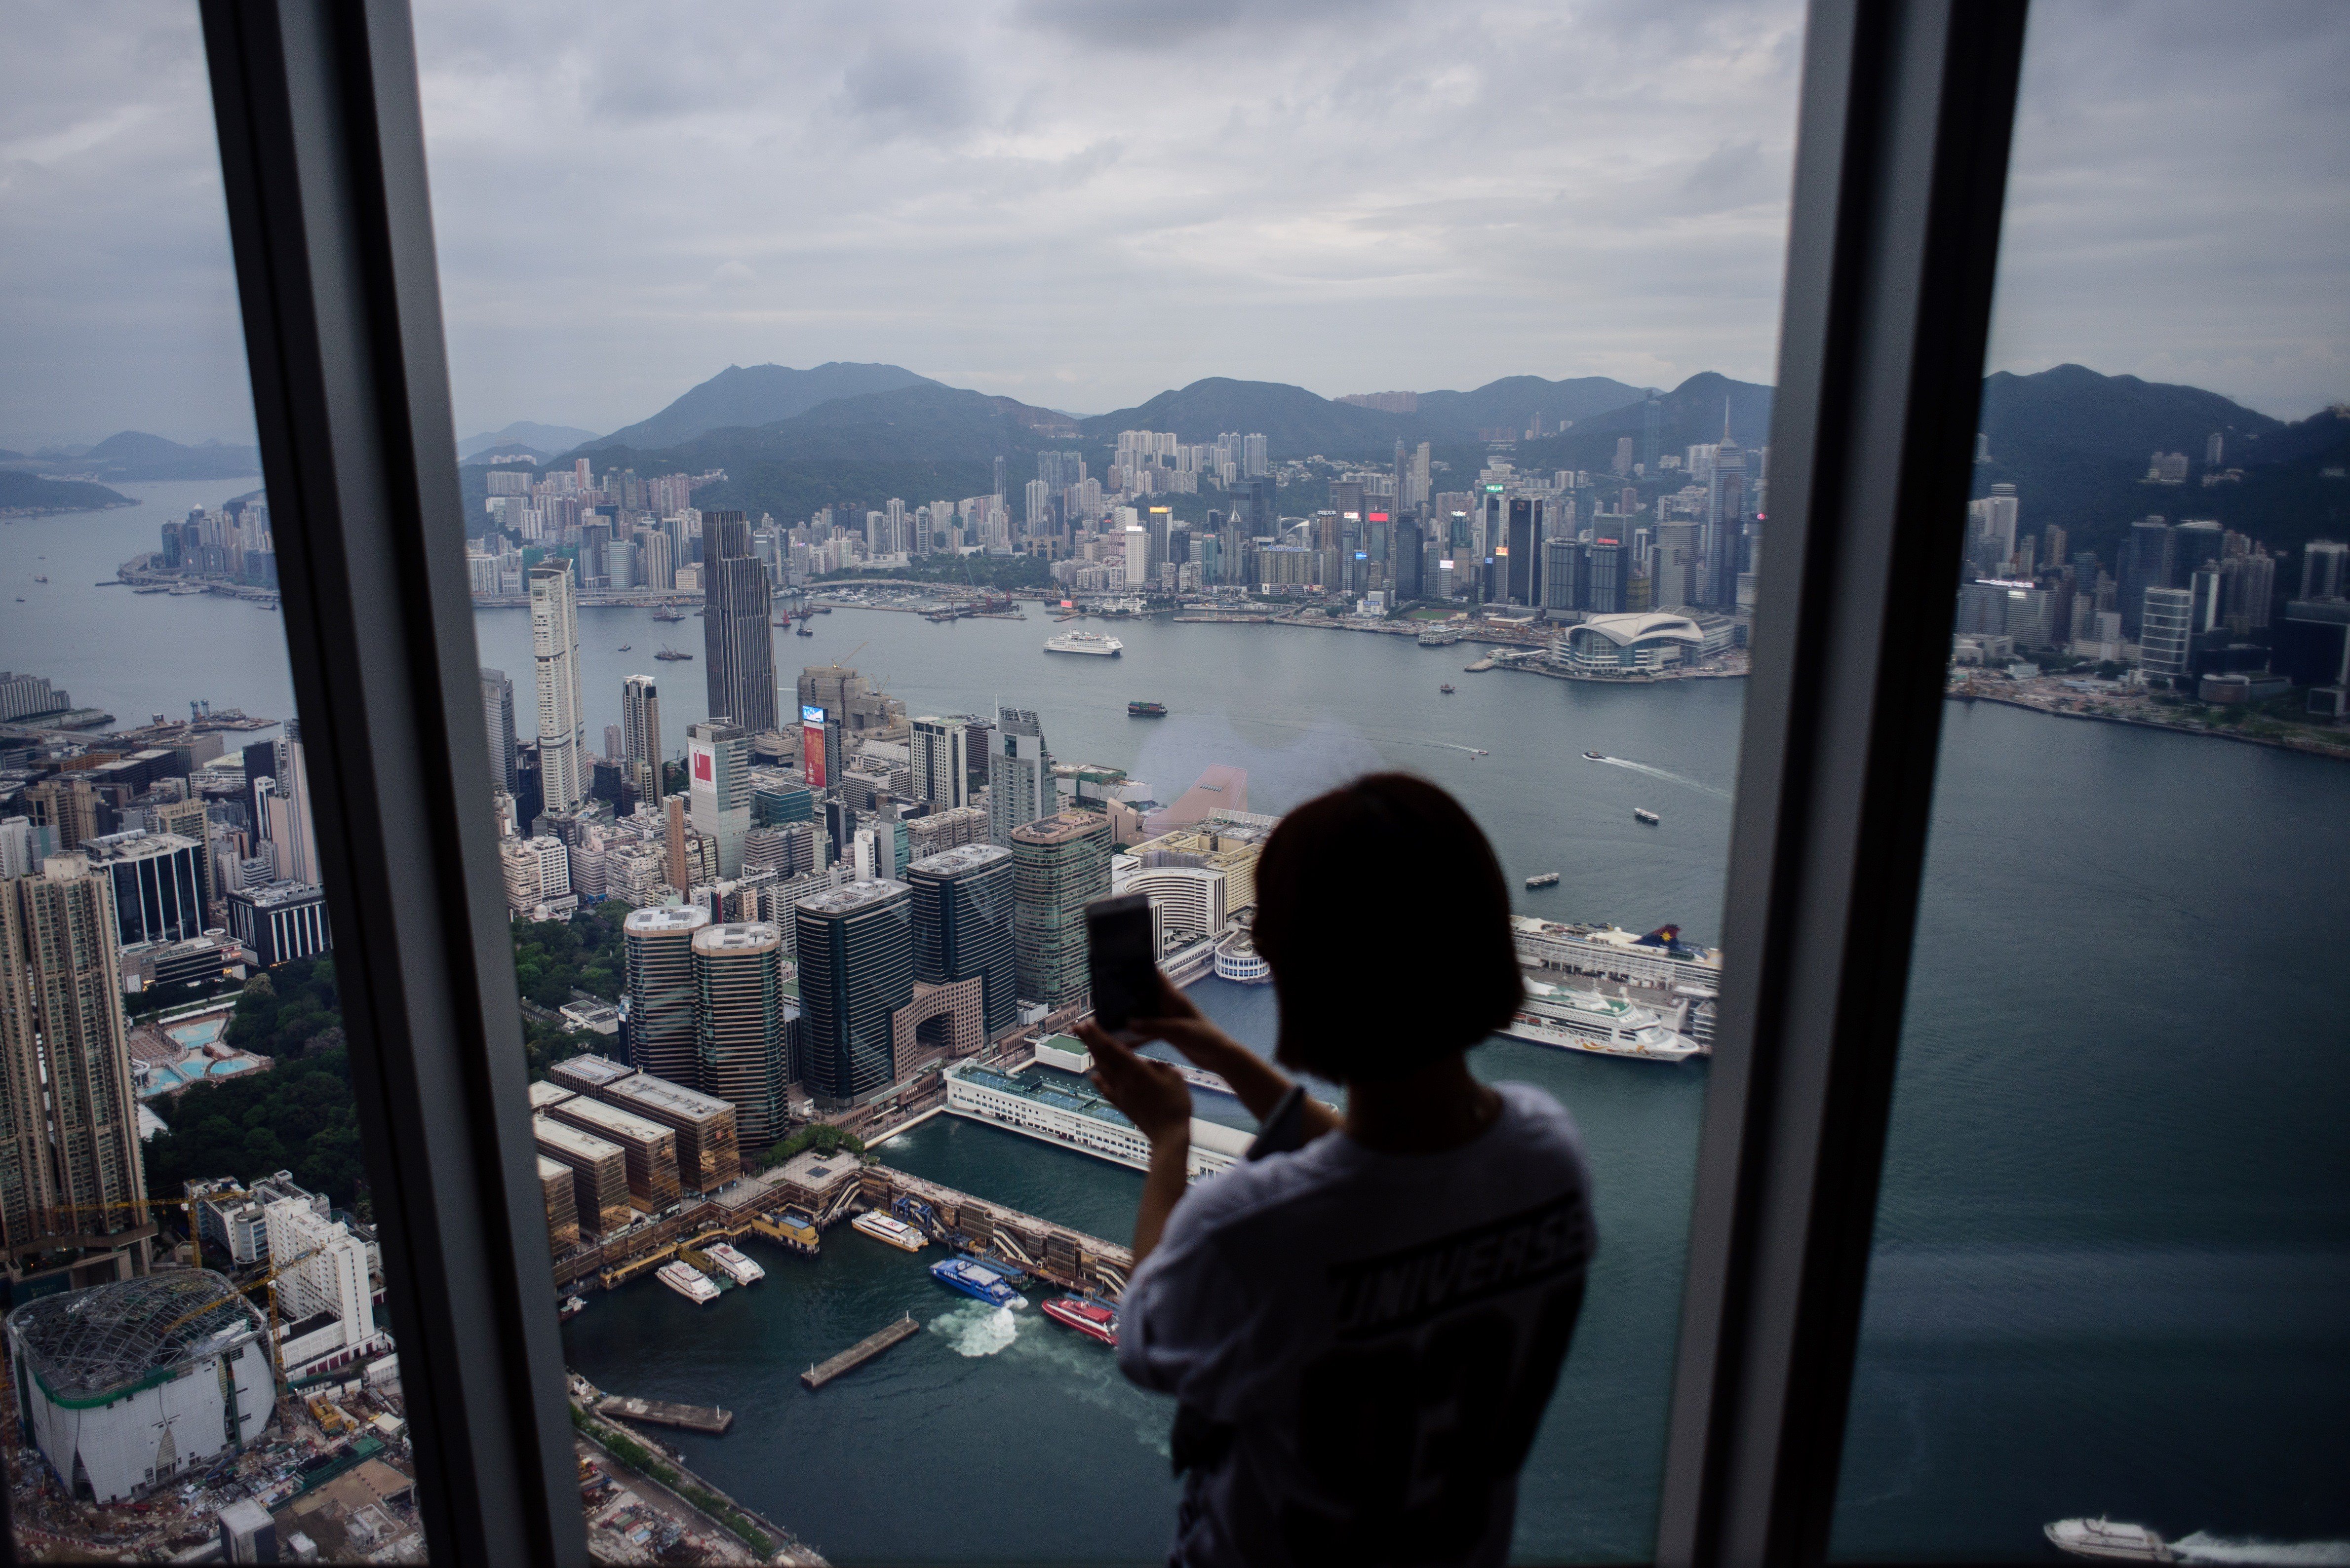 Hong Kong lags behind other cities like Singapore and Taiwan in terms of livability for expatriates. AFP Photo / Anthony Wallace